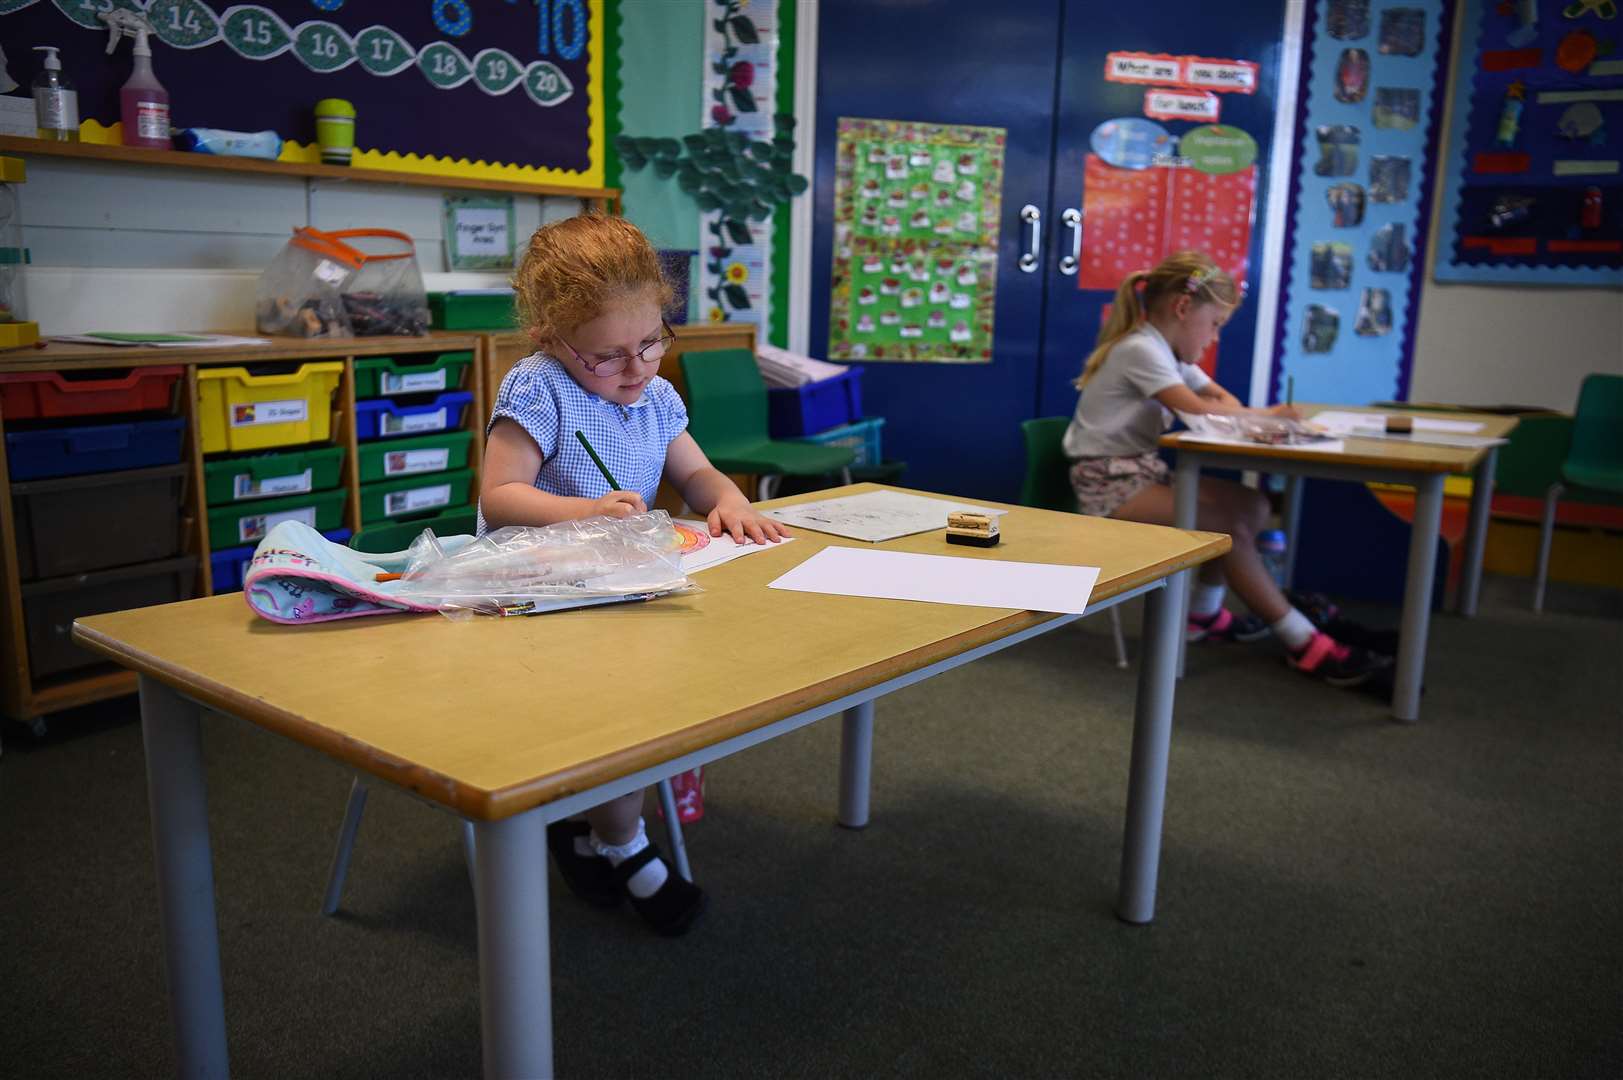 Pupils sit at separate desks at Hiltingbury Infant School (Kirsty O’Connor/PA)